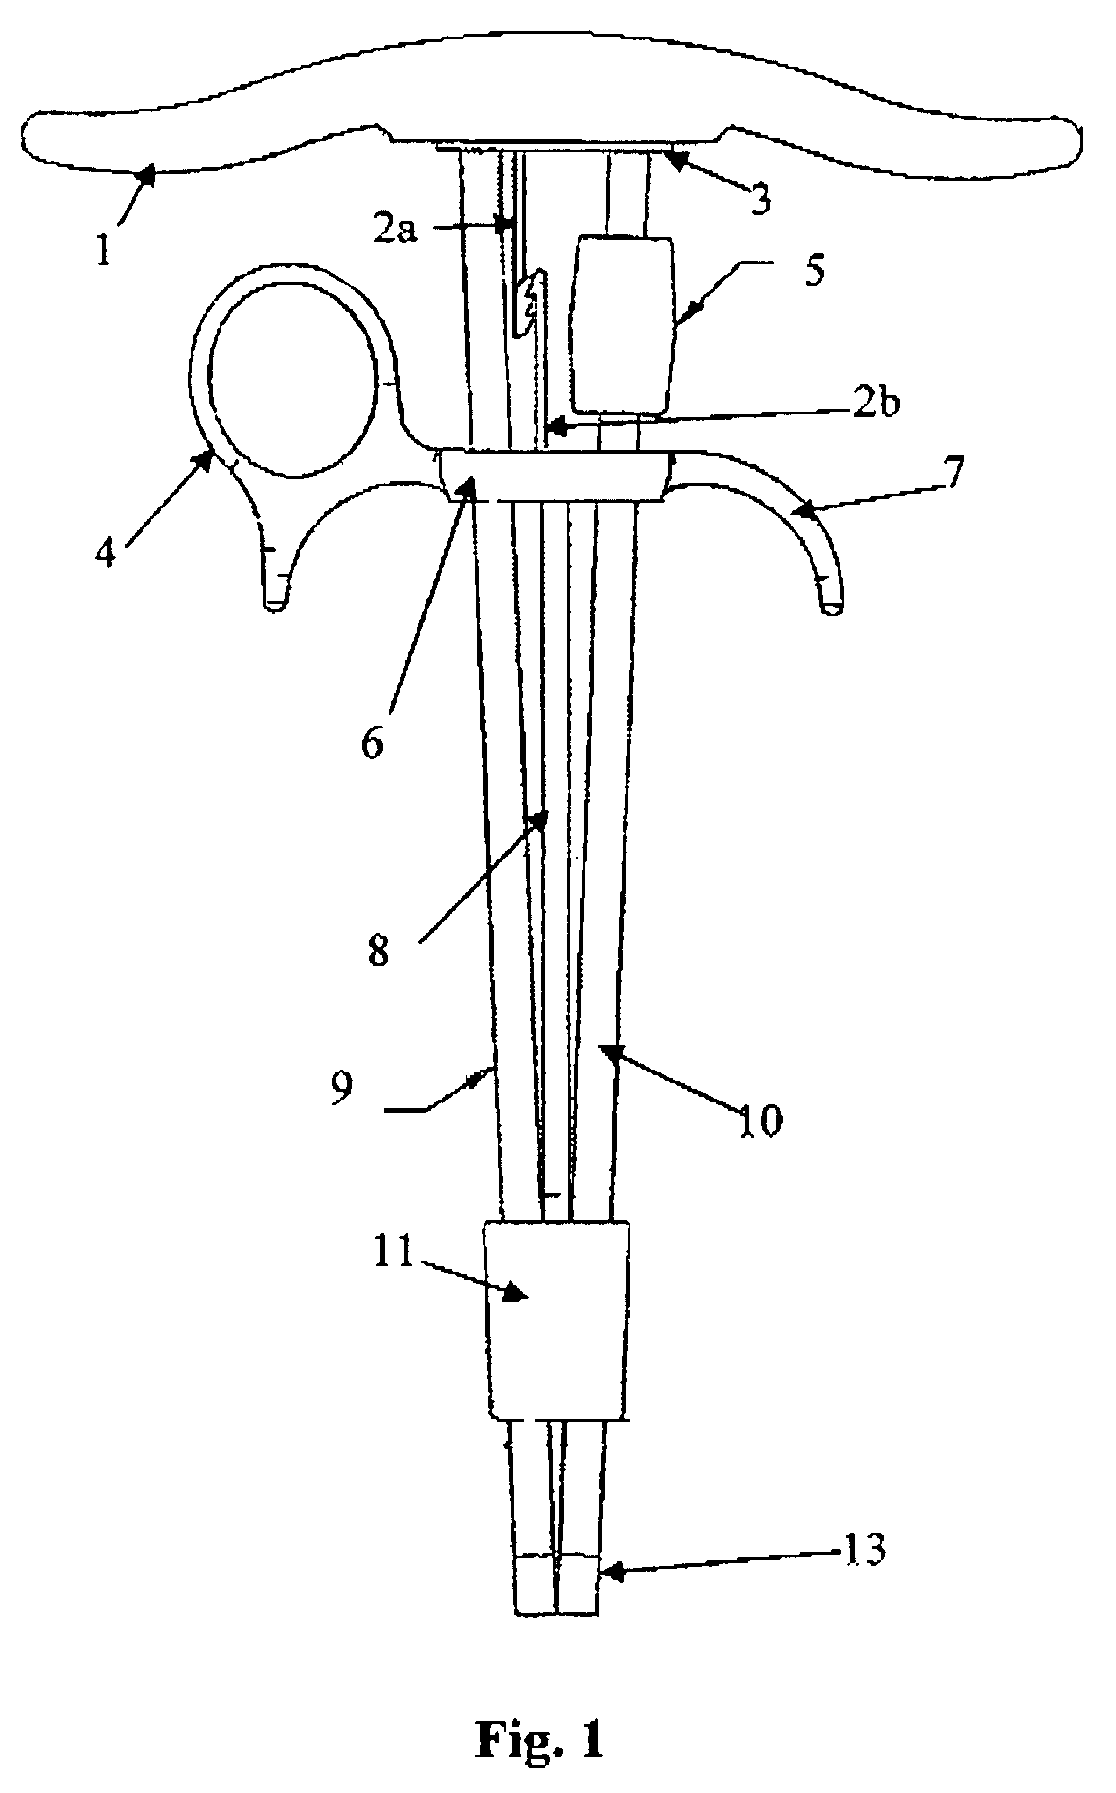 Pull locking rotational action needle driver